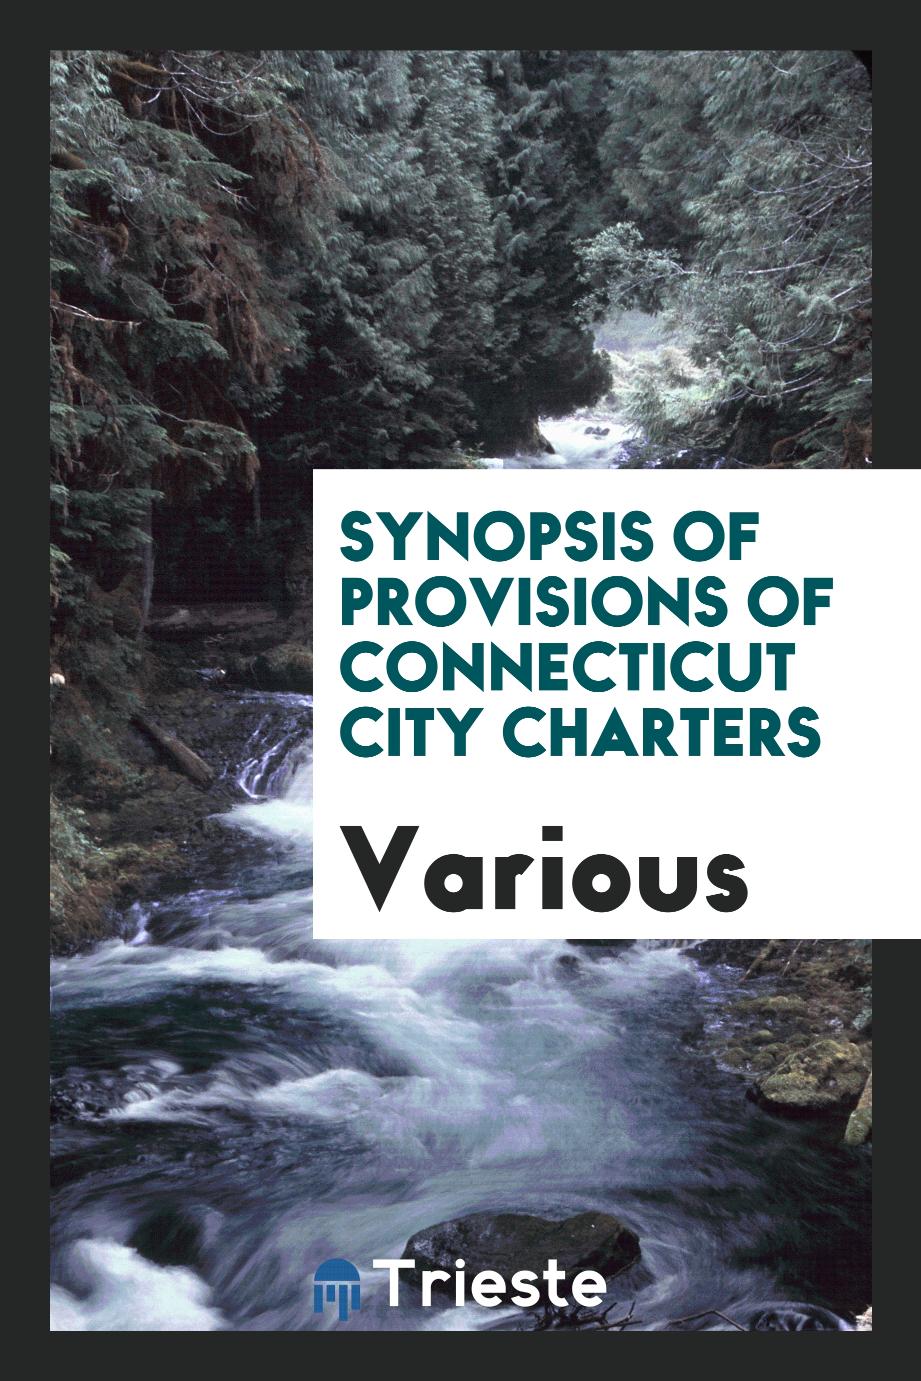 Synopsis of Provisions of Connecticut City Charters